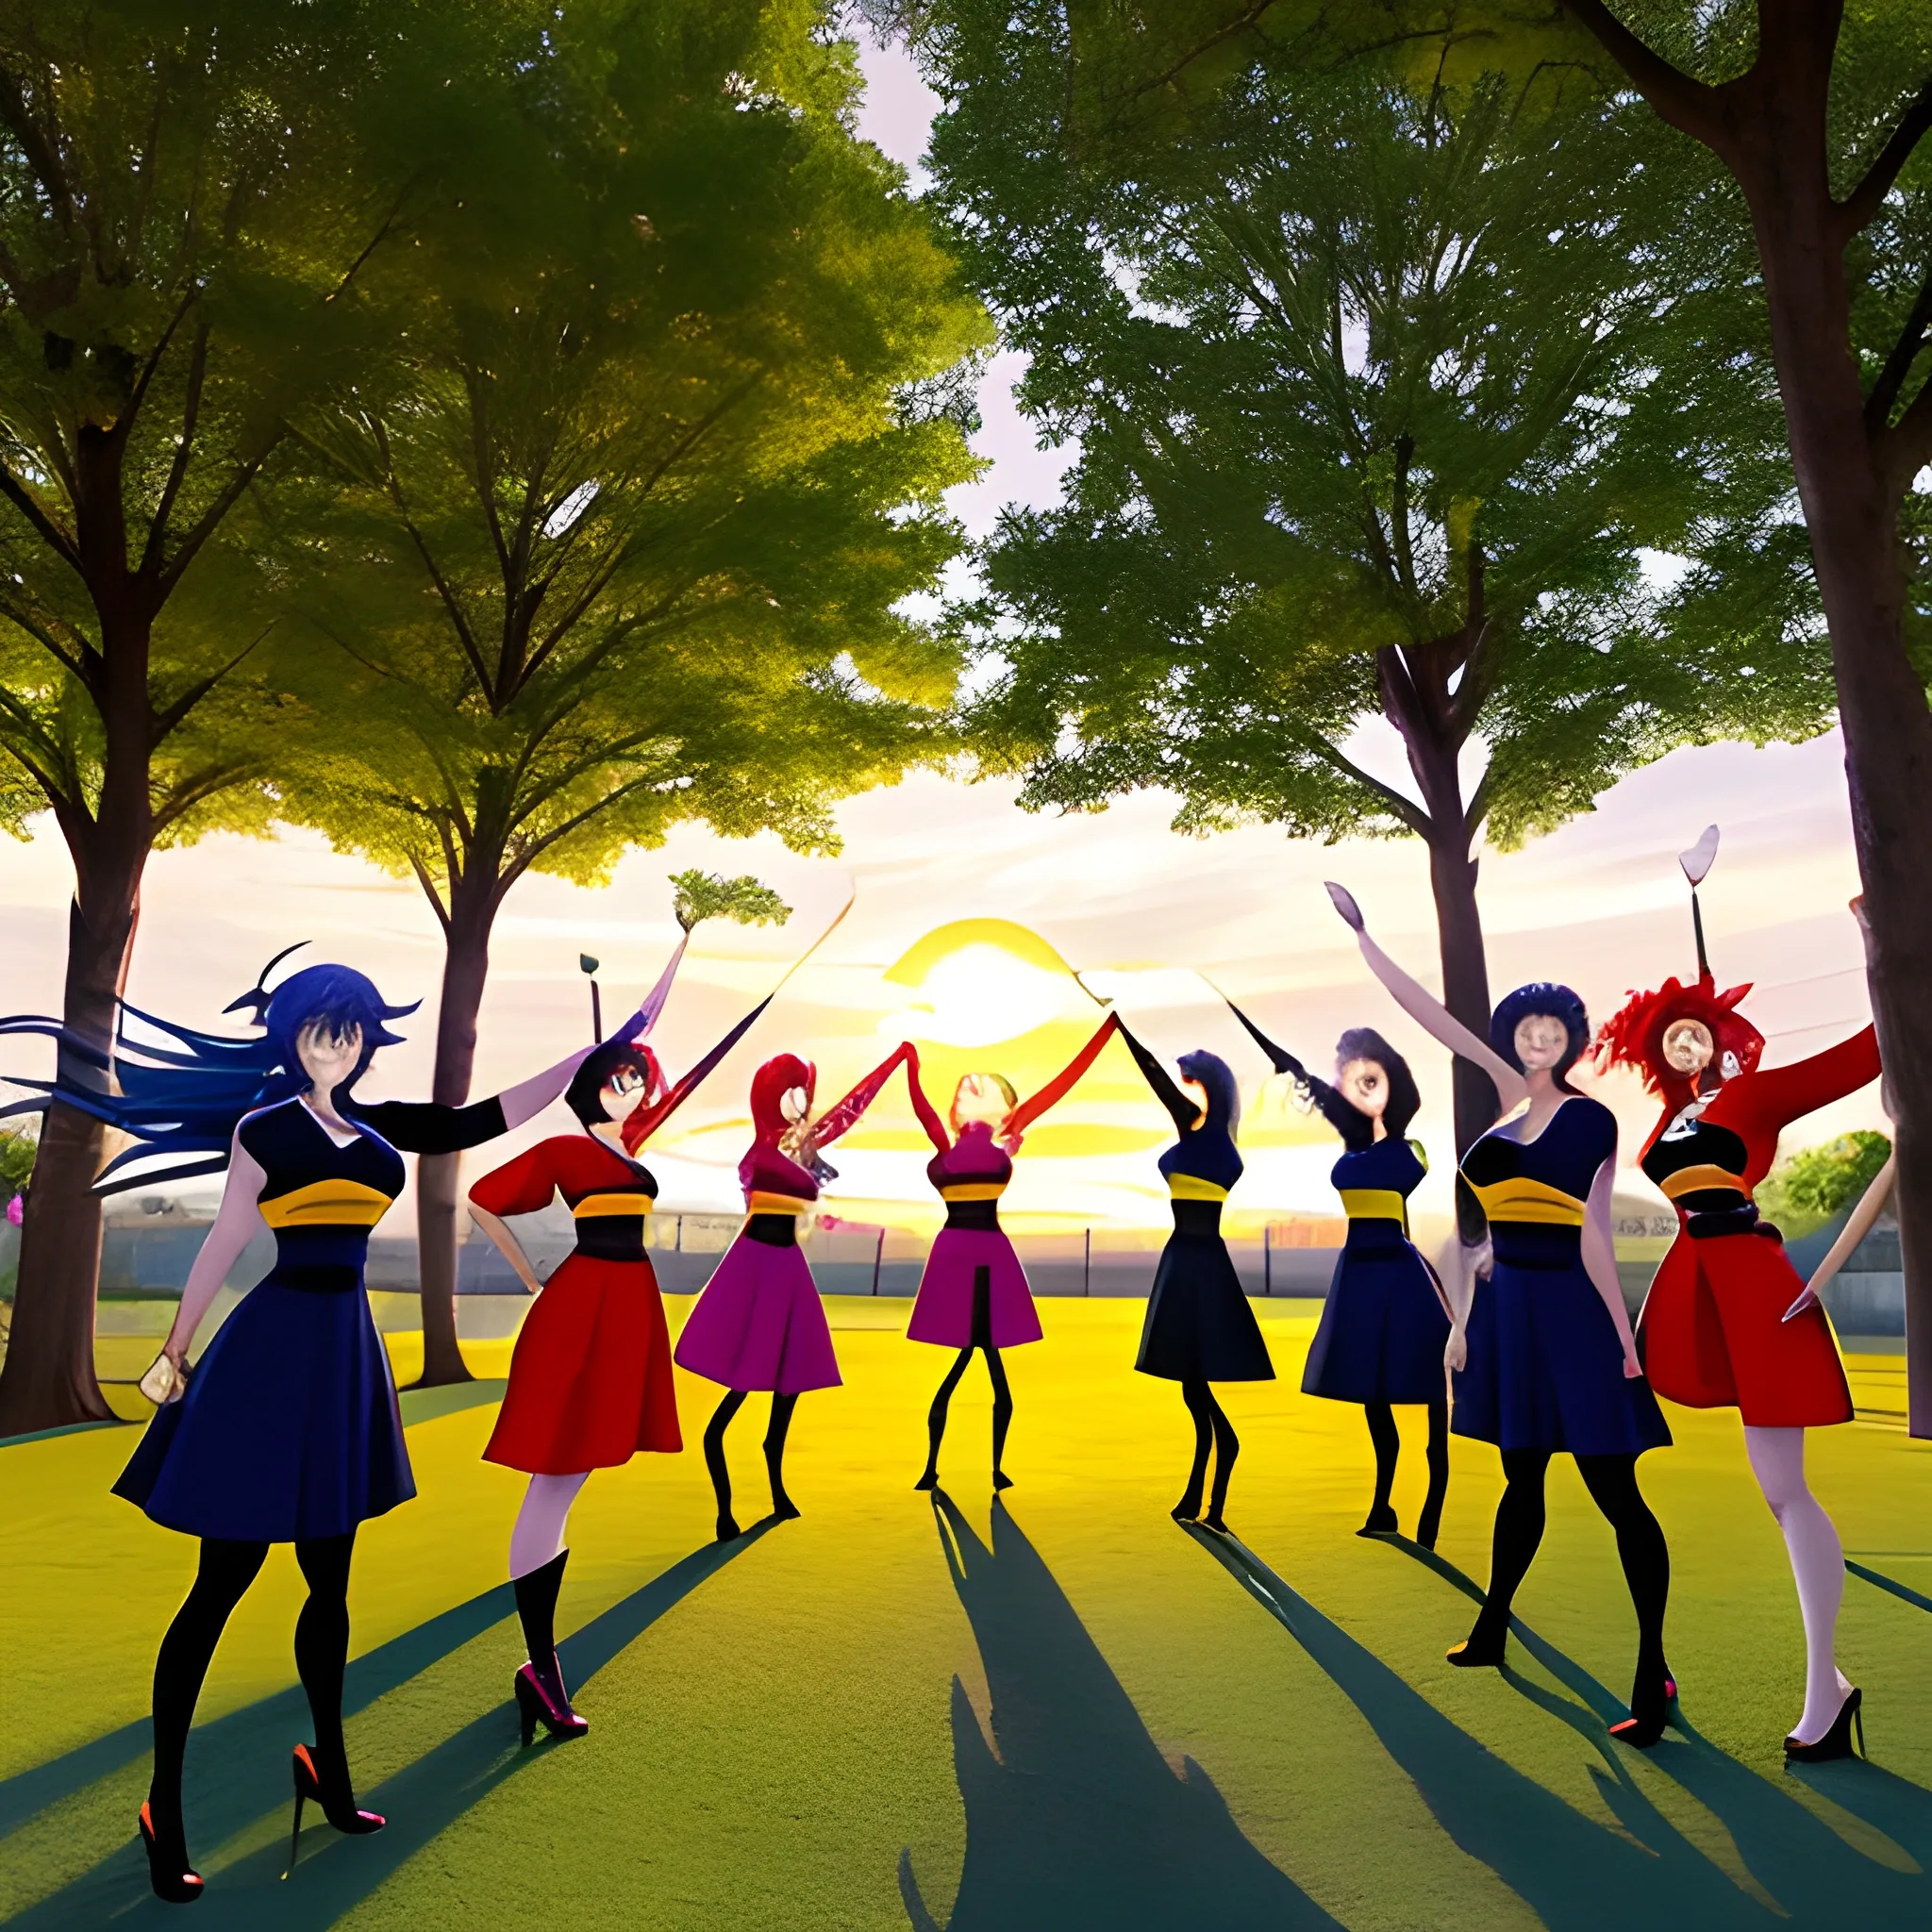 As the sun sets over the playground, a group of anime school girls gather to play a game of tag. Their colorful uniforms and playful expressions add a sense of whimsy to the scene, while the shadows cast by the setting sun create a dramatic backdrop.